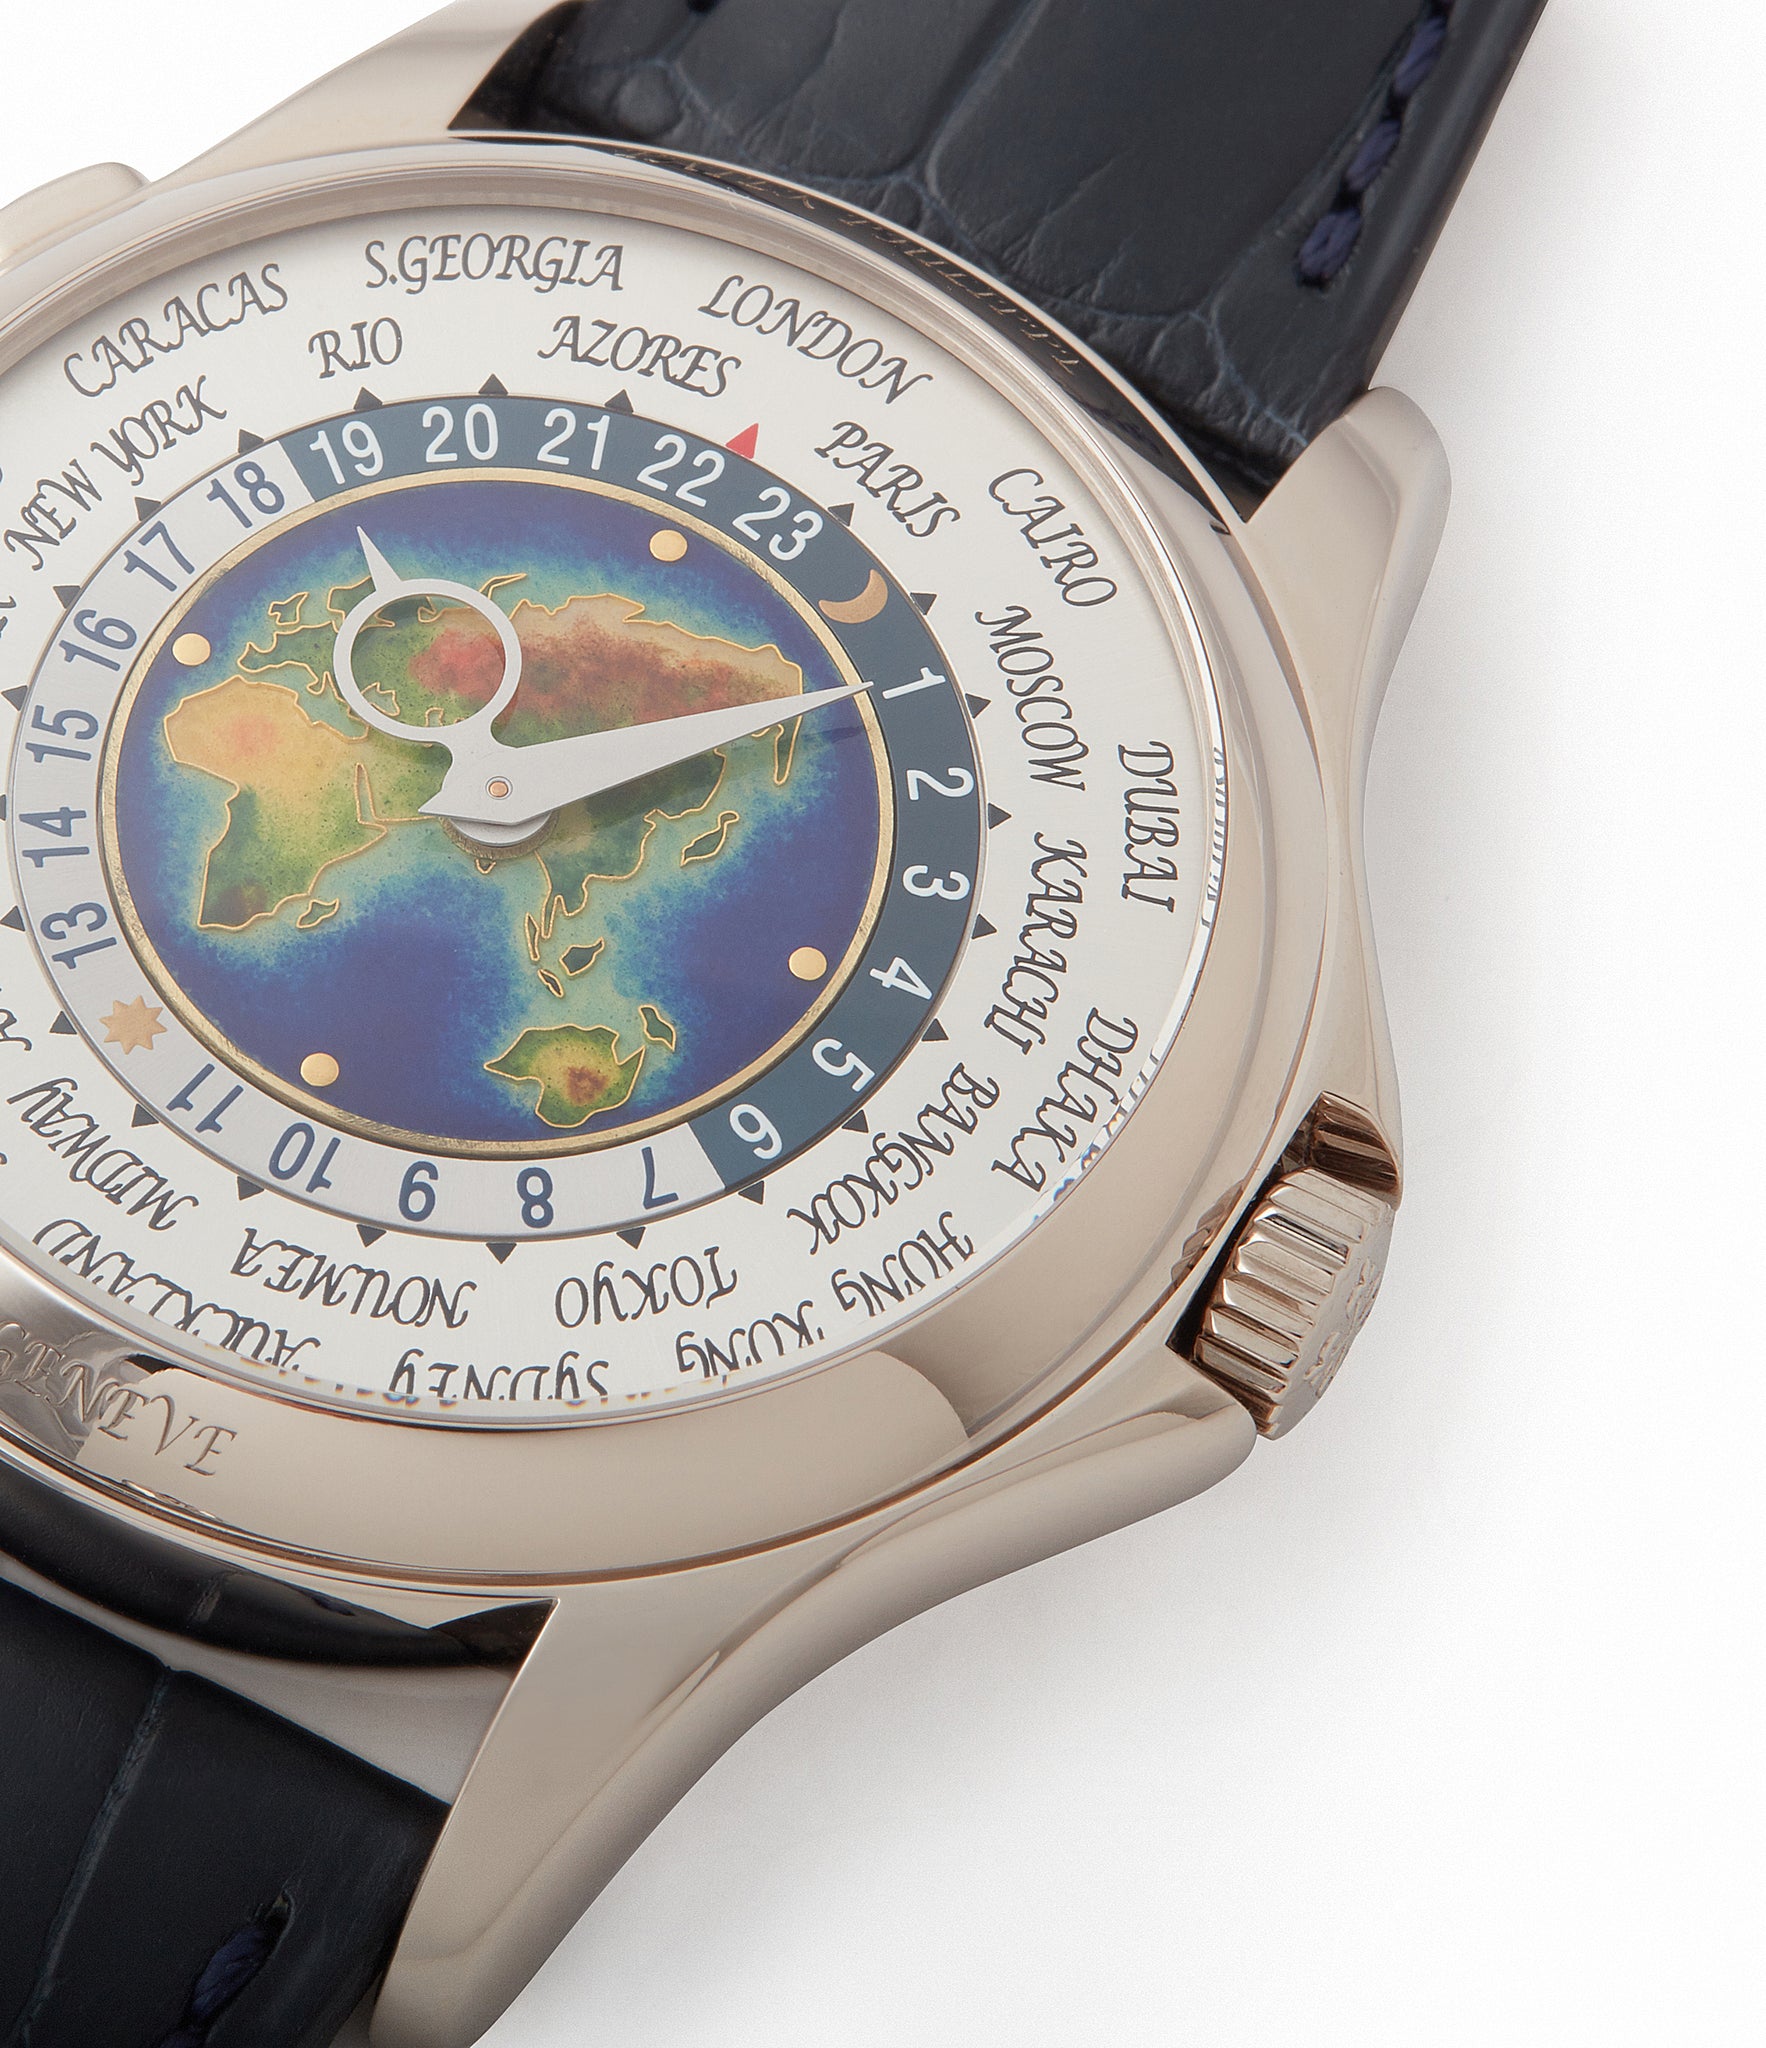 for sale Patek Philippe World Time 5131G enamel dial white gold watch for sale online at A Collected Man London UK specialist of rare watches